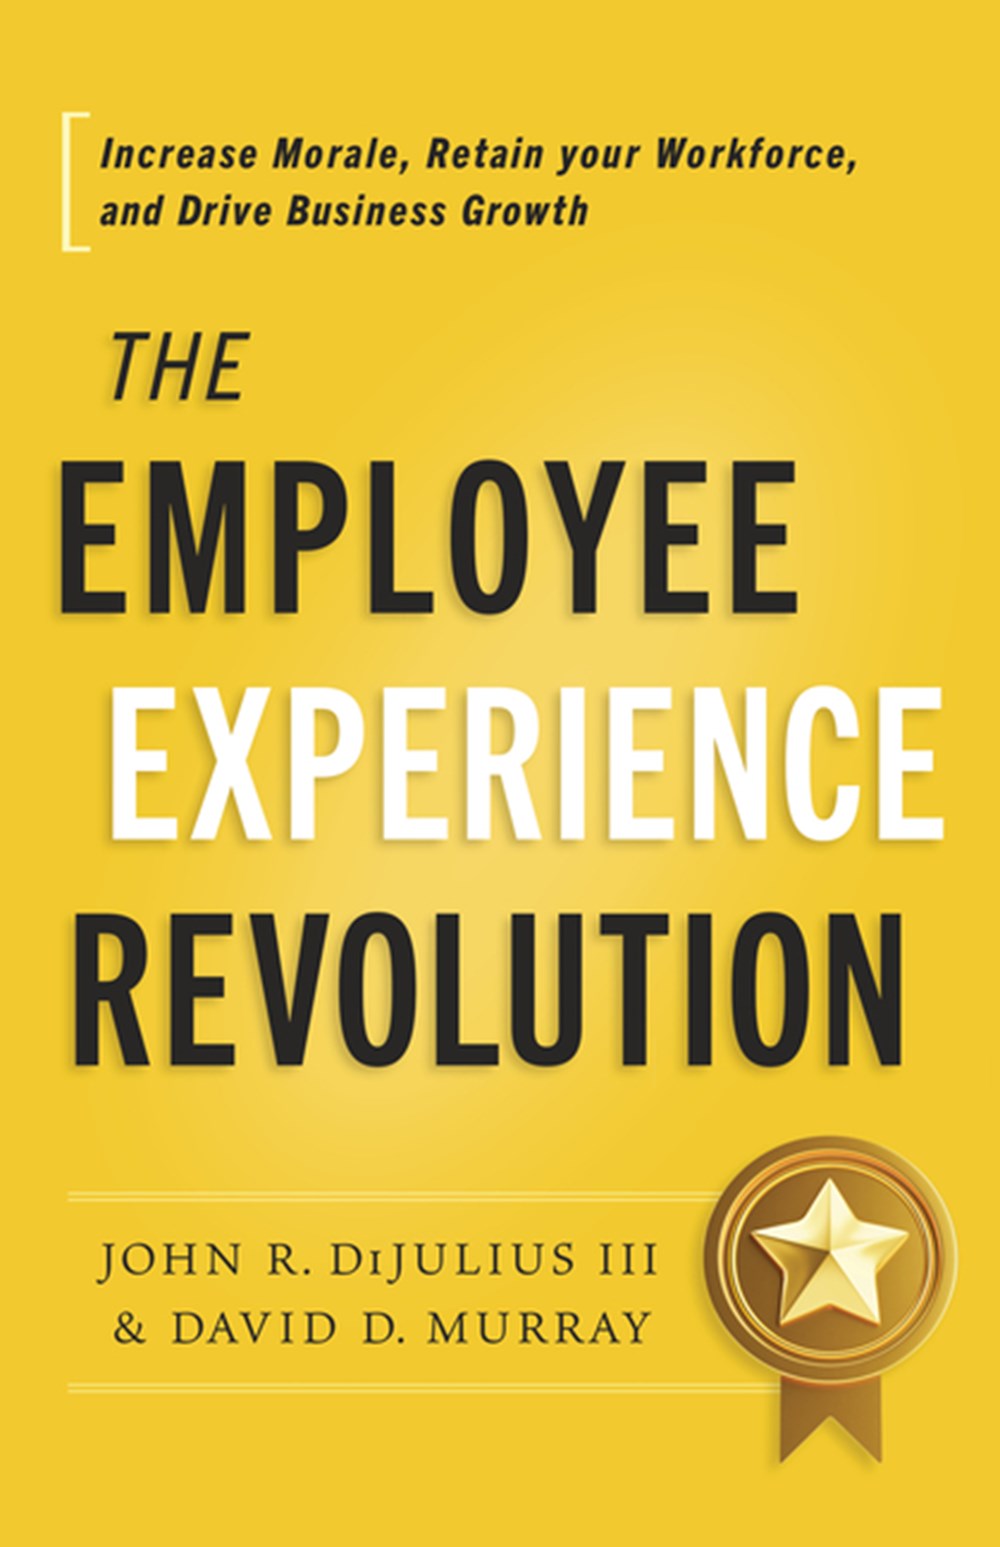 Employee Experience Revolution: Increase Morale, Retain Your Workforce, and Drive Business Growth